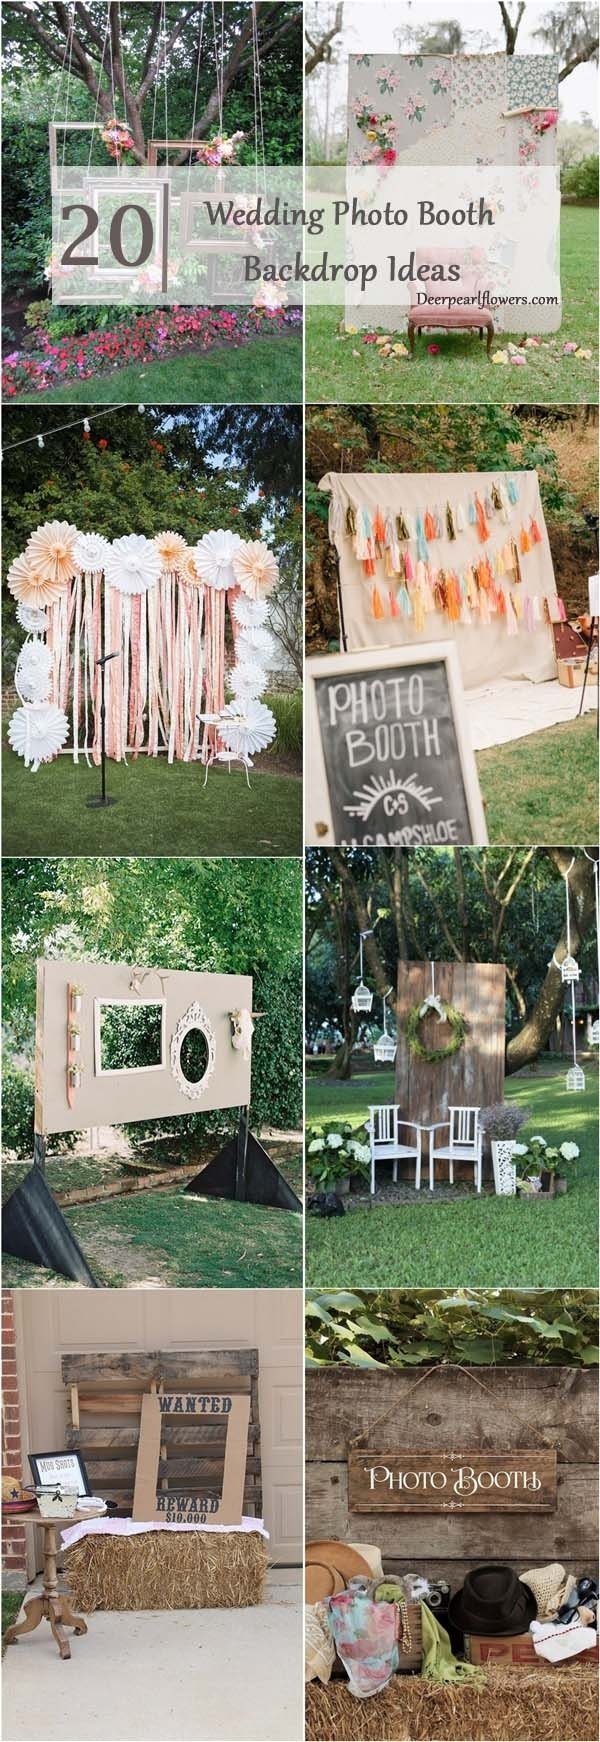 10 Most Popular Photo Booth Ideas For Weddings 20 brilliant wedding photo booth ideas deer pearl flowers 2022